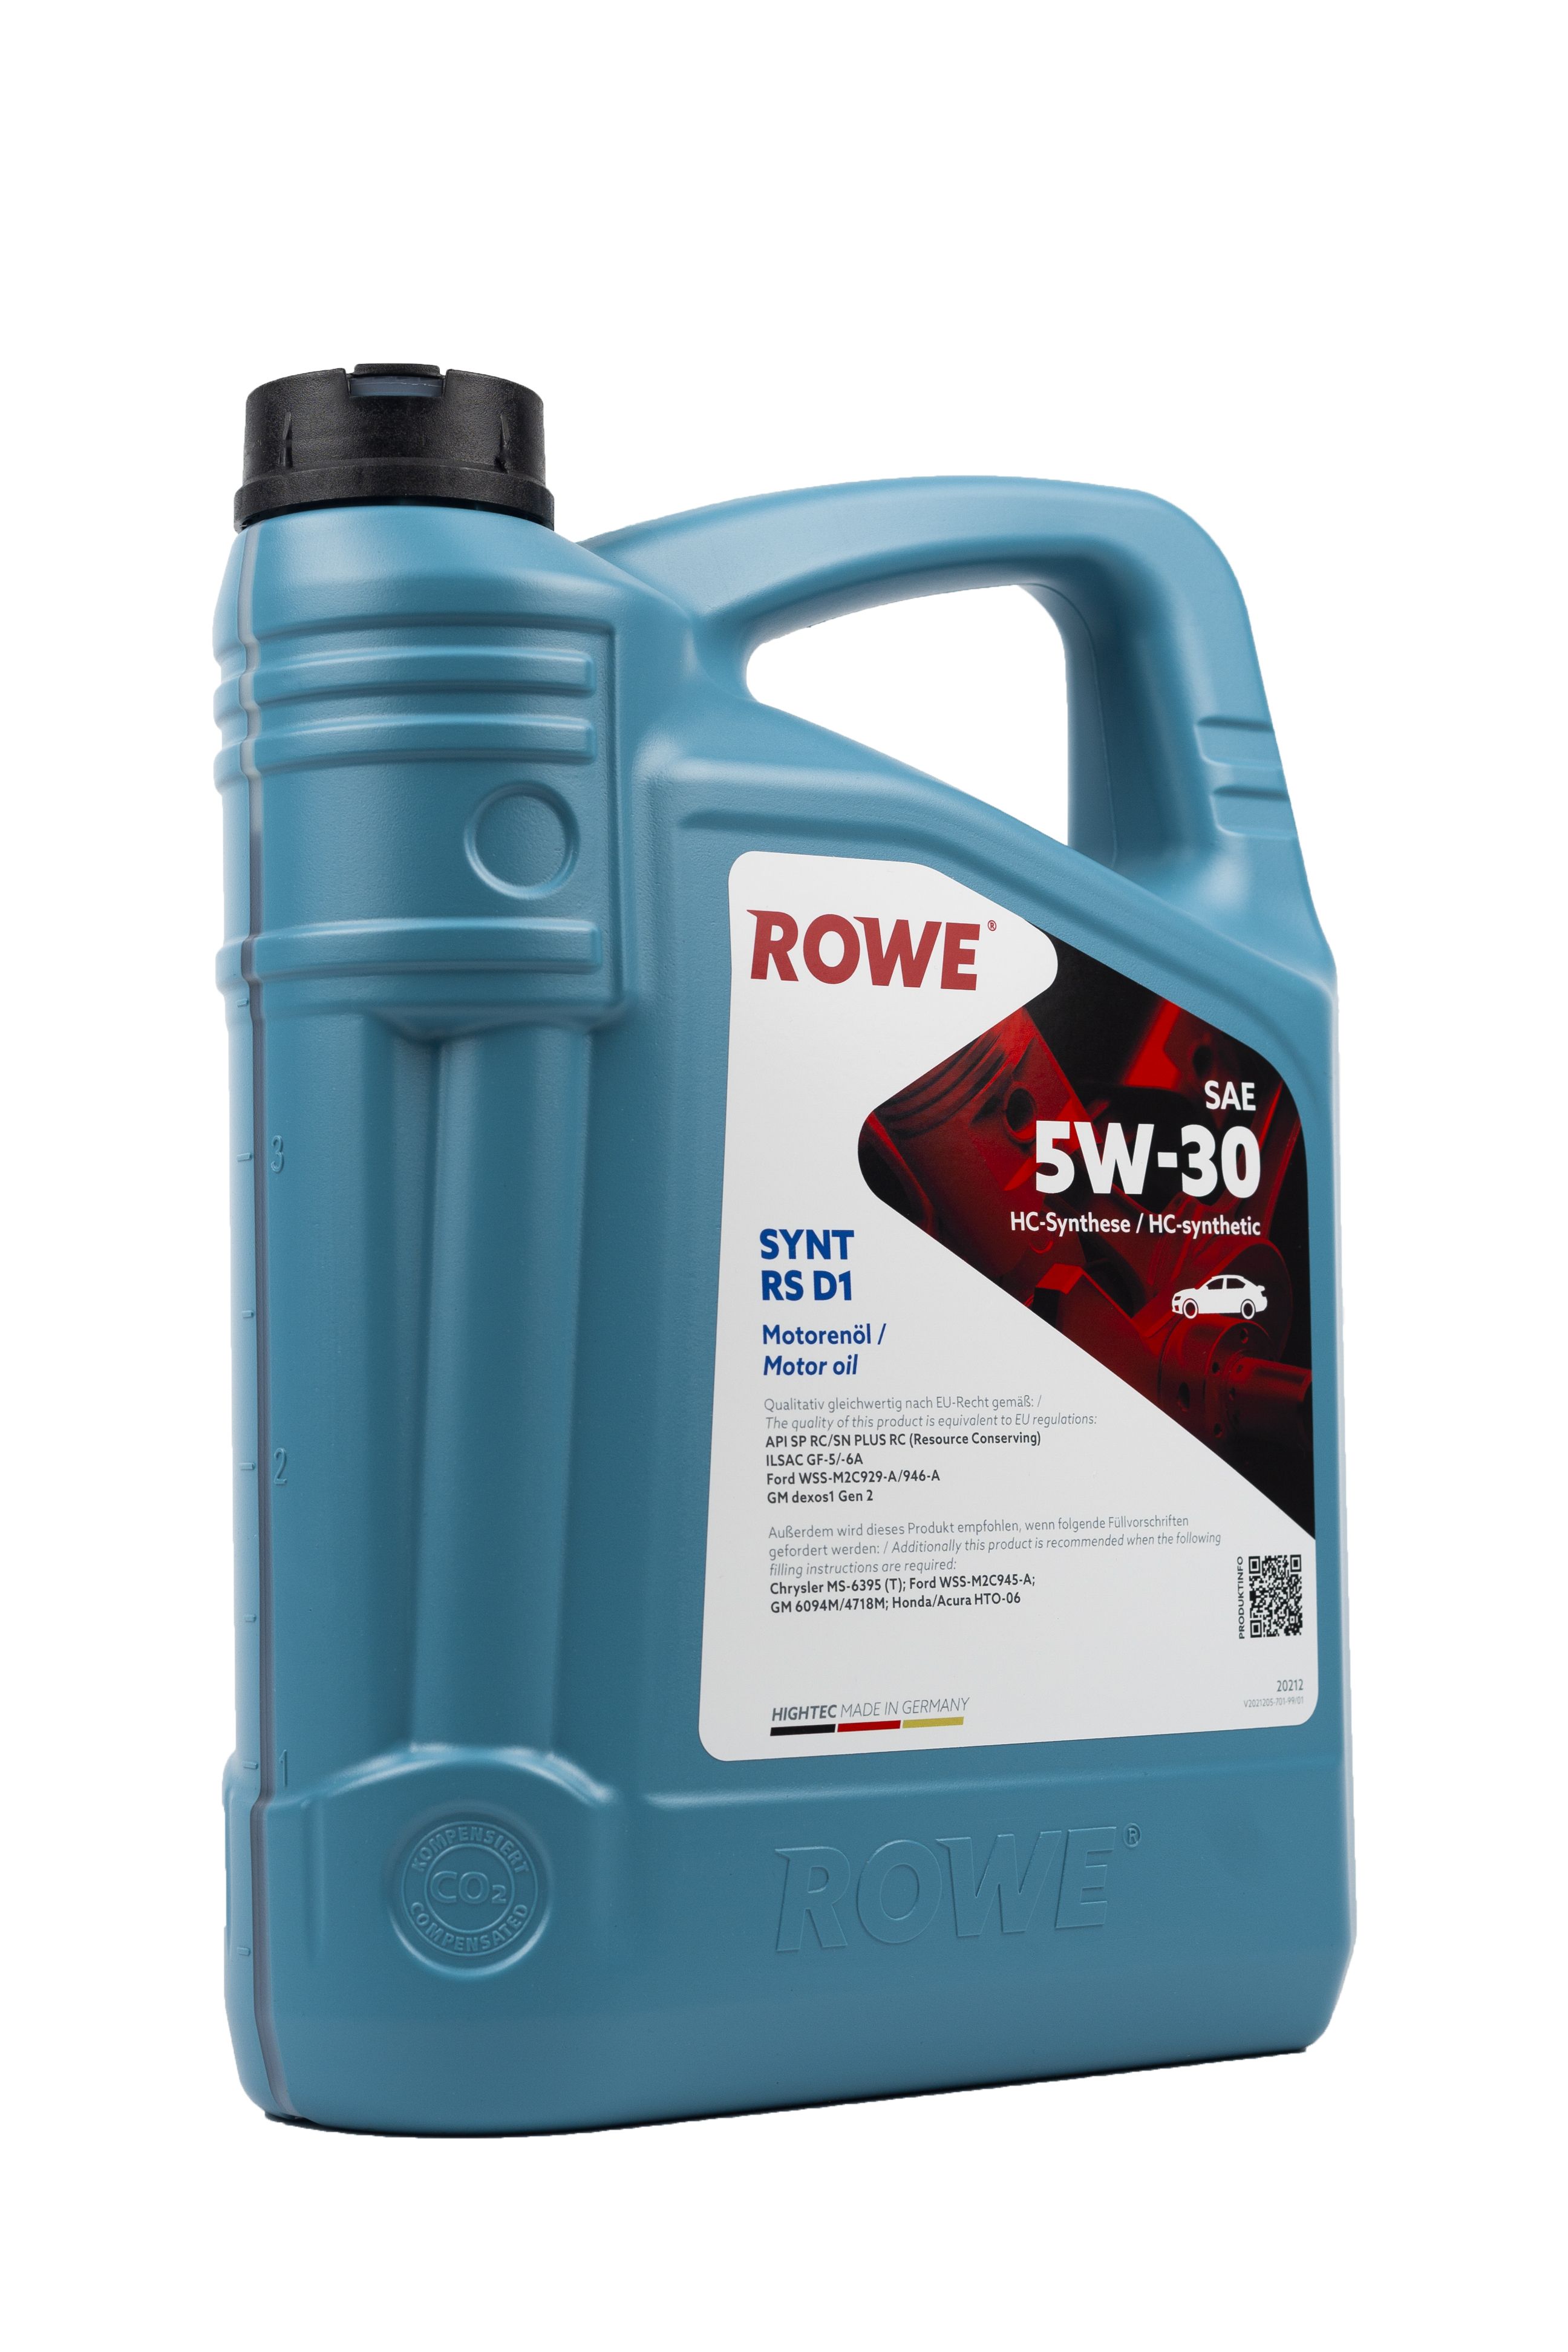 Rove масло. Rowe 5w30 Synt. Synt RS d1 5w-30 Rowe. Rowe 5w30 Ford. Hightec Synt RS d1 SAE 5w-30.